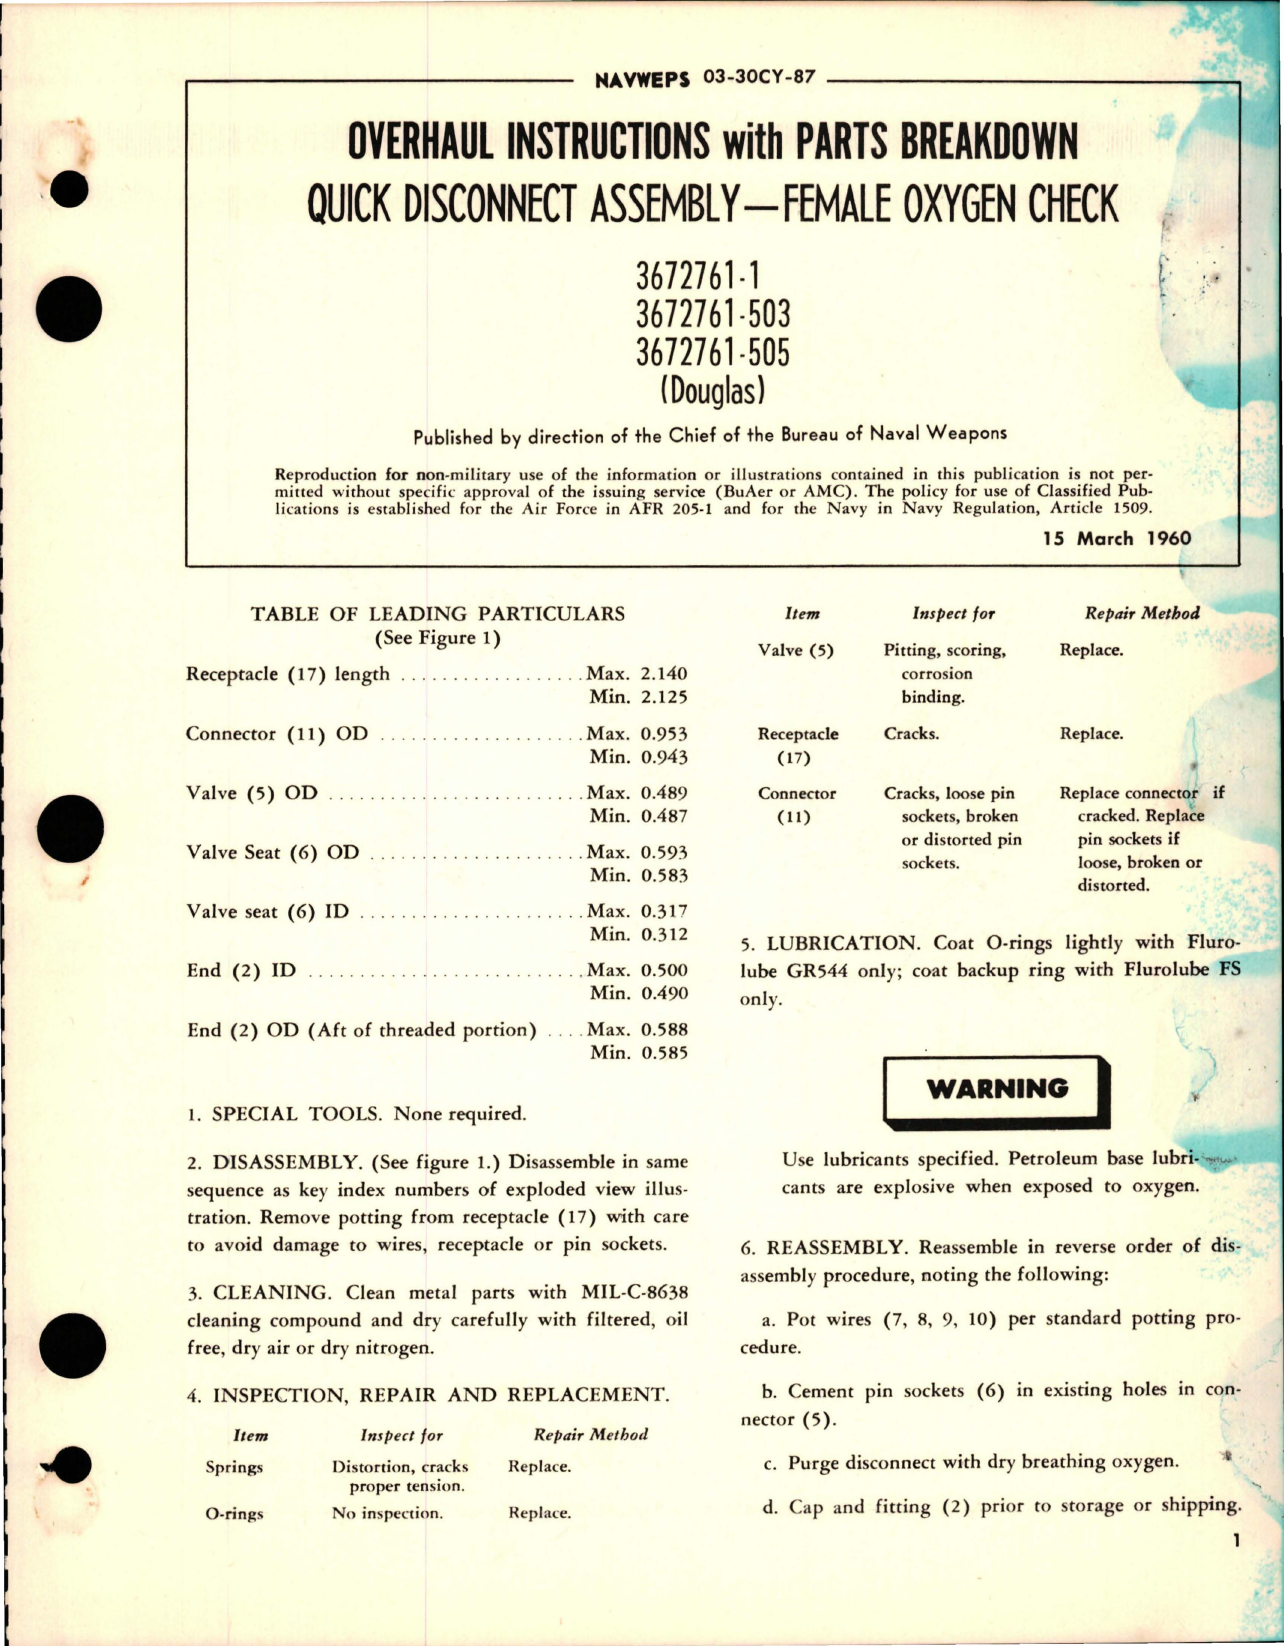 Sample page 1 from AirCorps Library document: Overhaul Instructions with Parts for Female Oxygen Check Quick Disconnect Assembly - 3672761-1, 3672761-503, and 3672761-505